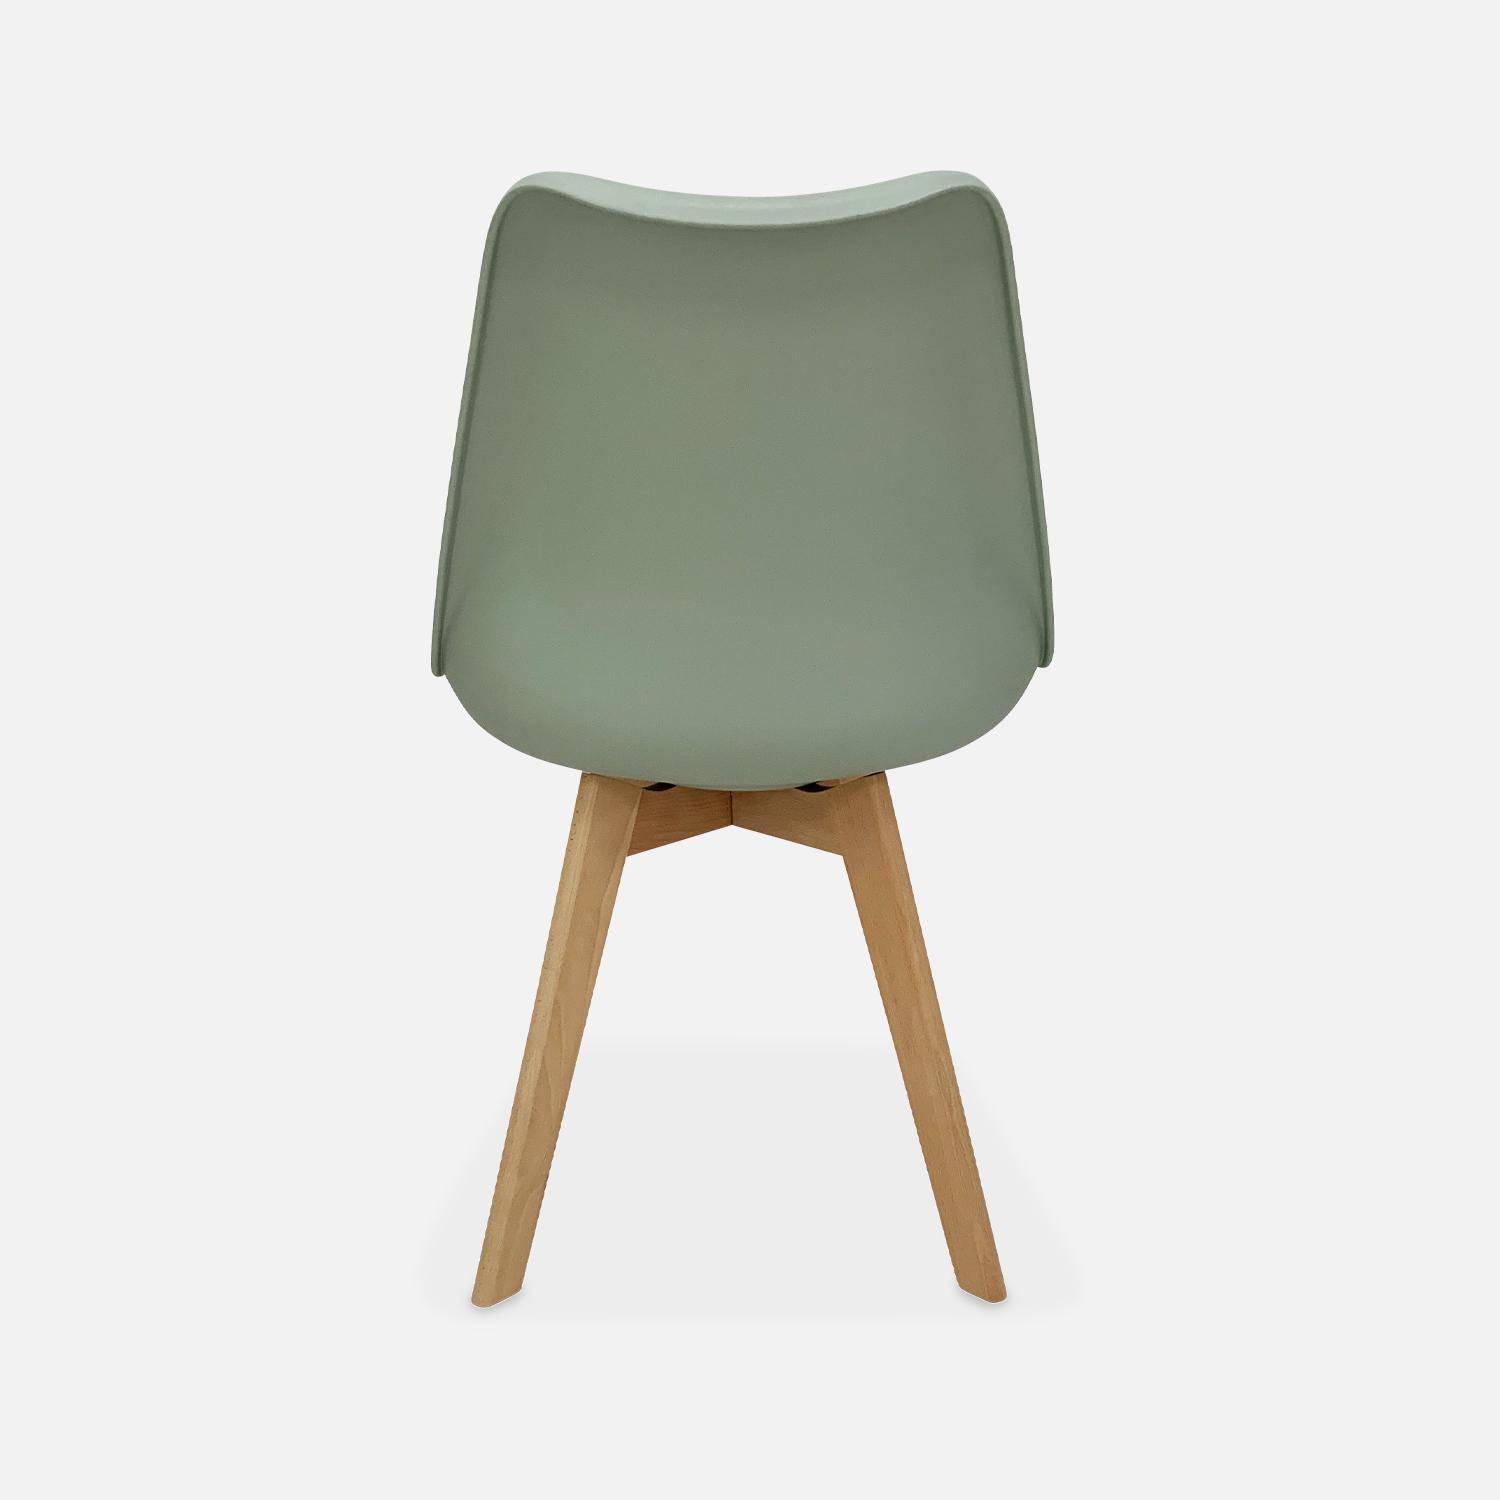 Pair of scandi-style dining chairs, green, L49xD55xH81cm, NILS,sweeek,Photo4